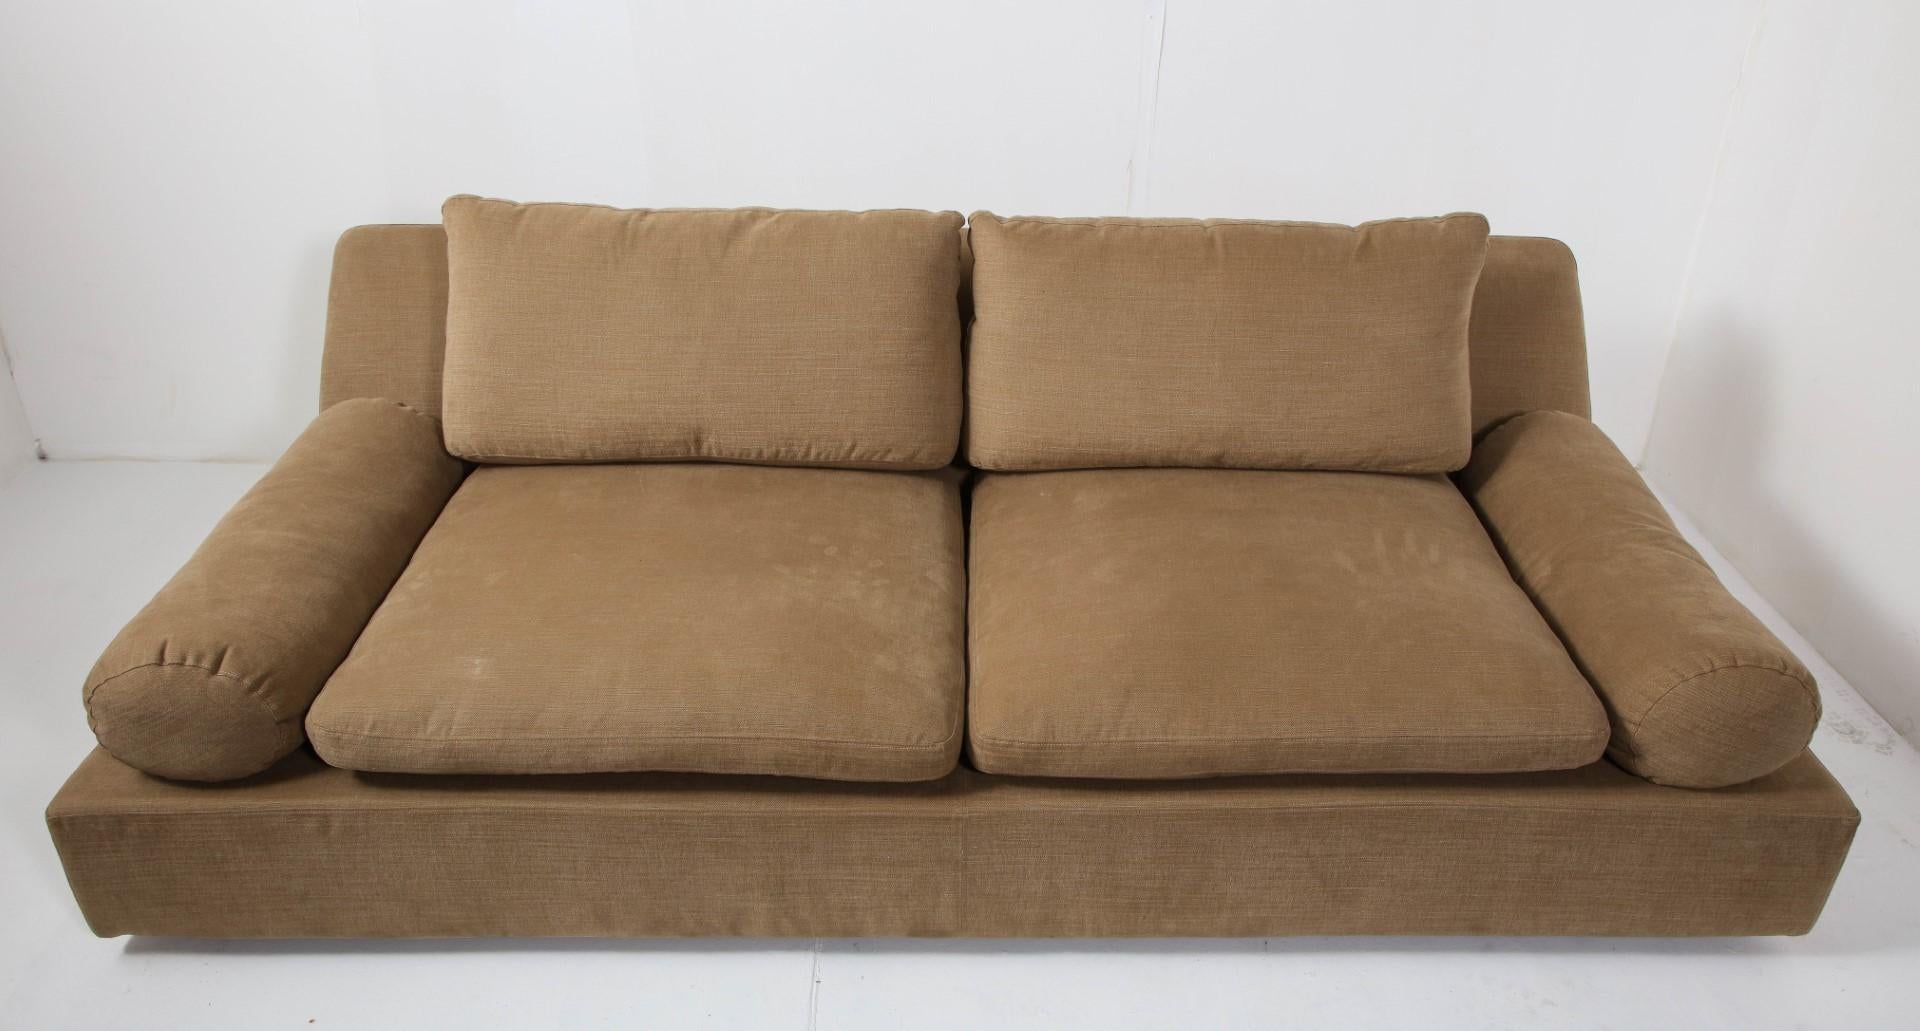 Contemporary low-slung Nube Italia two-seat Tender sofa designed by Carlo Colombo, tan cotton upholstery with bolster arms. Foam & feather seat cushions; back cushion and bolsters in feather. Like-new condition. 

Measures: Arm height 19